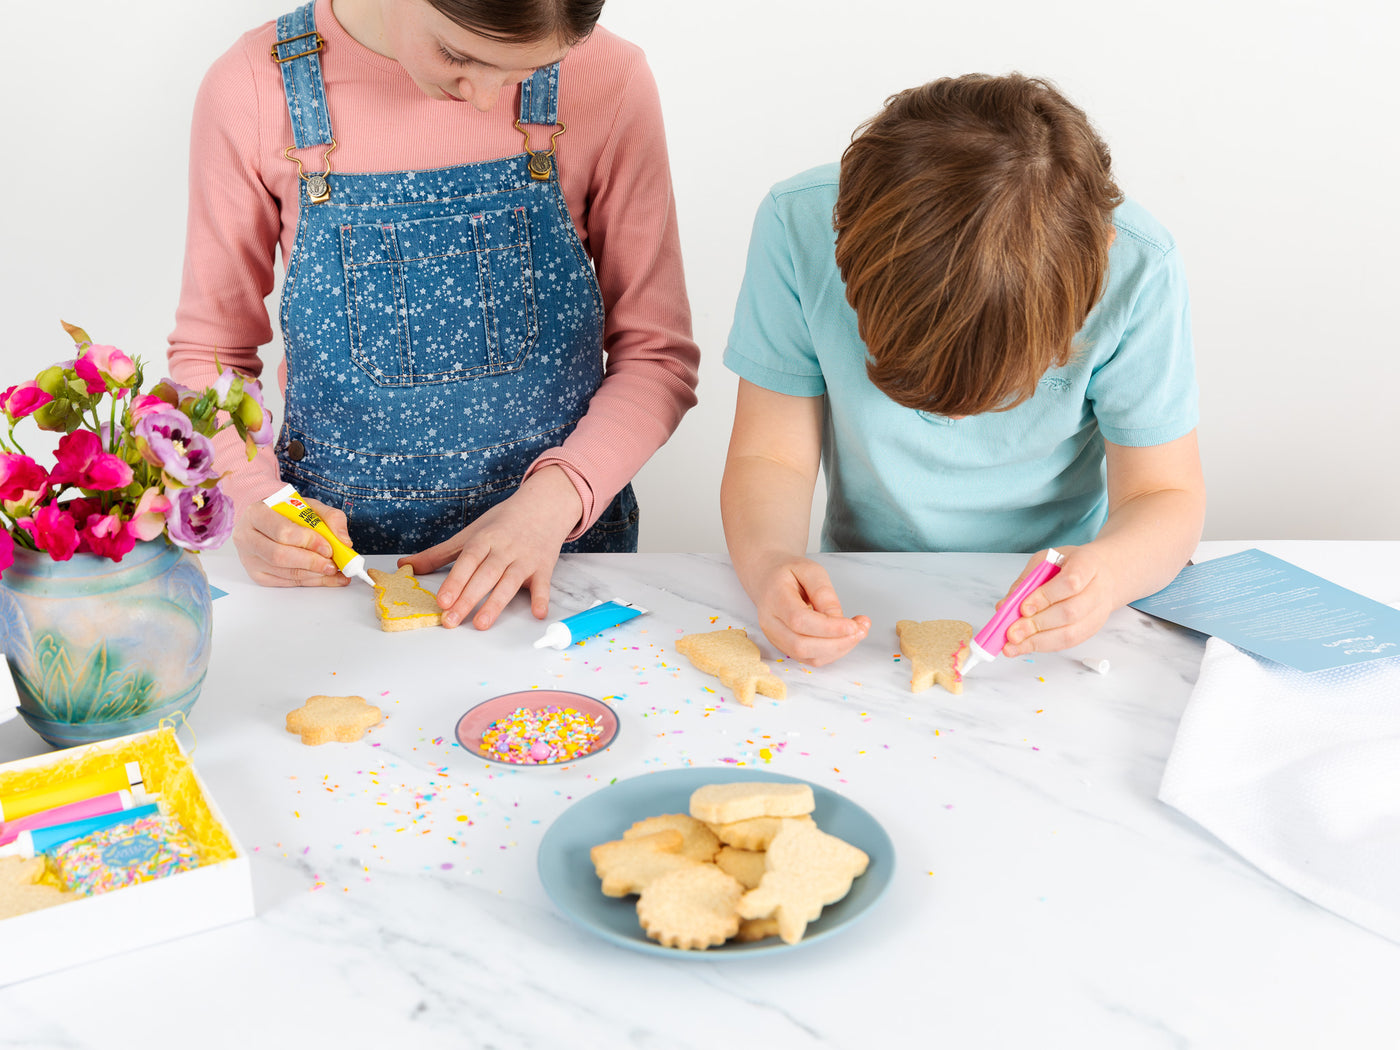 Easter Biscuit Icing Kit